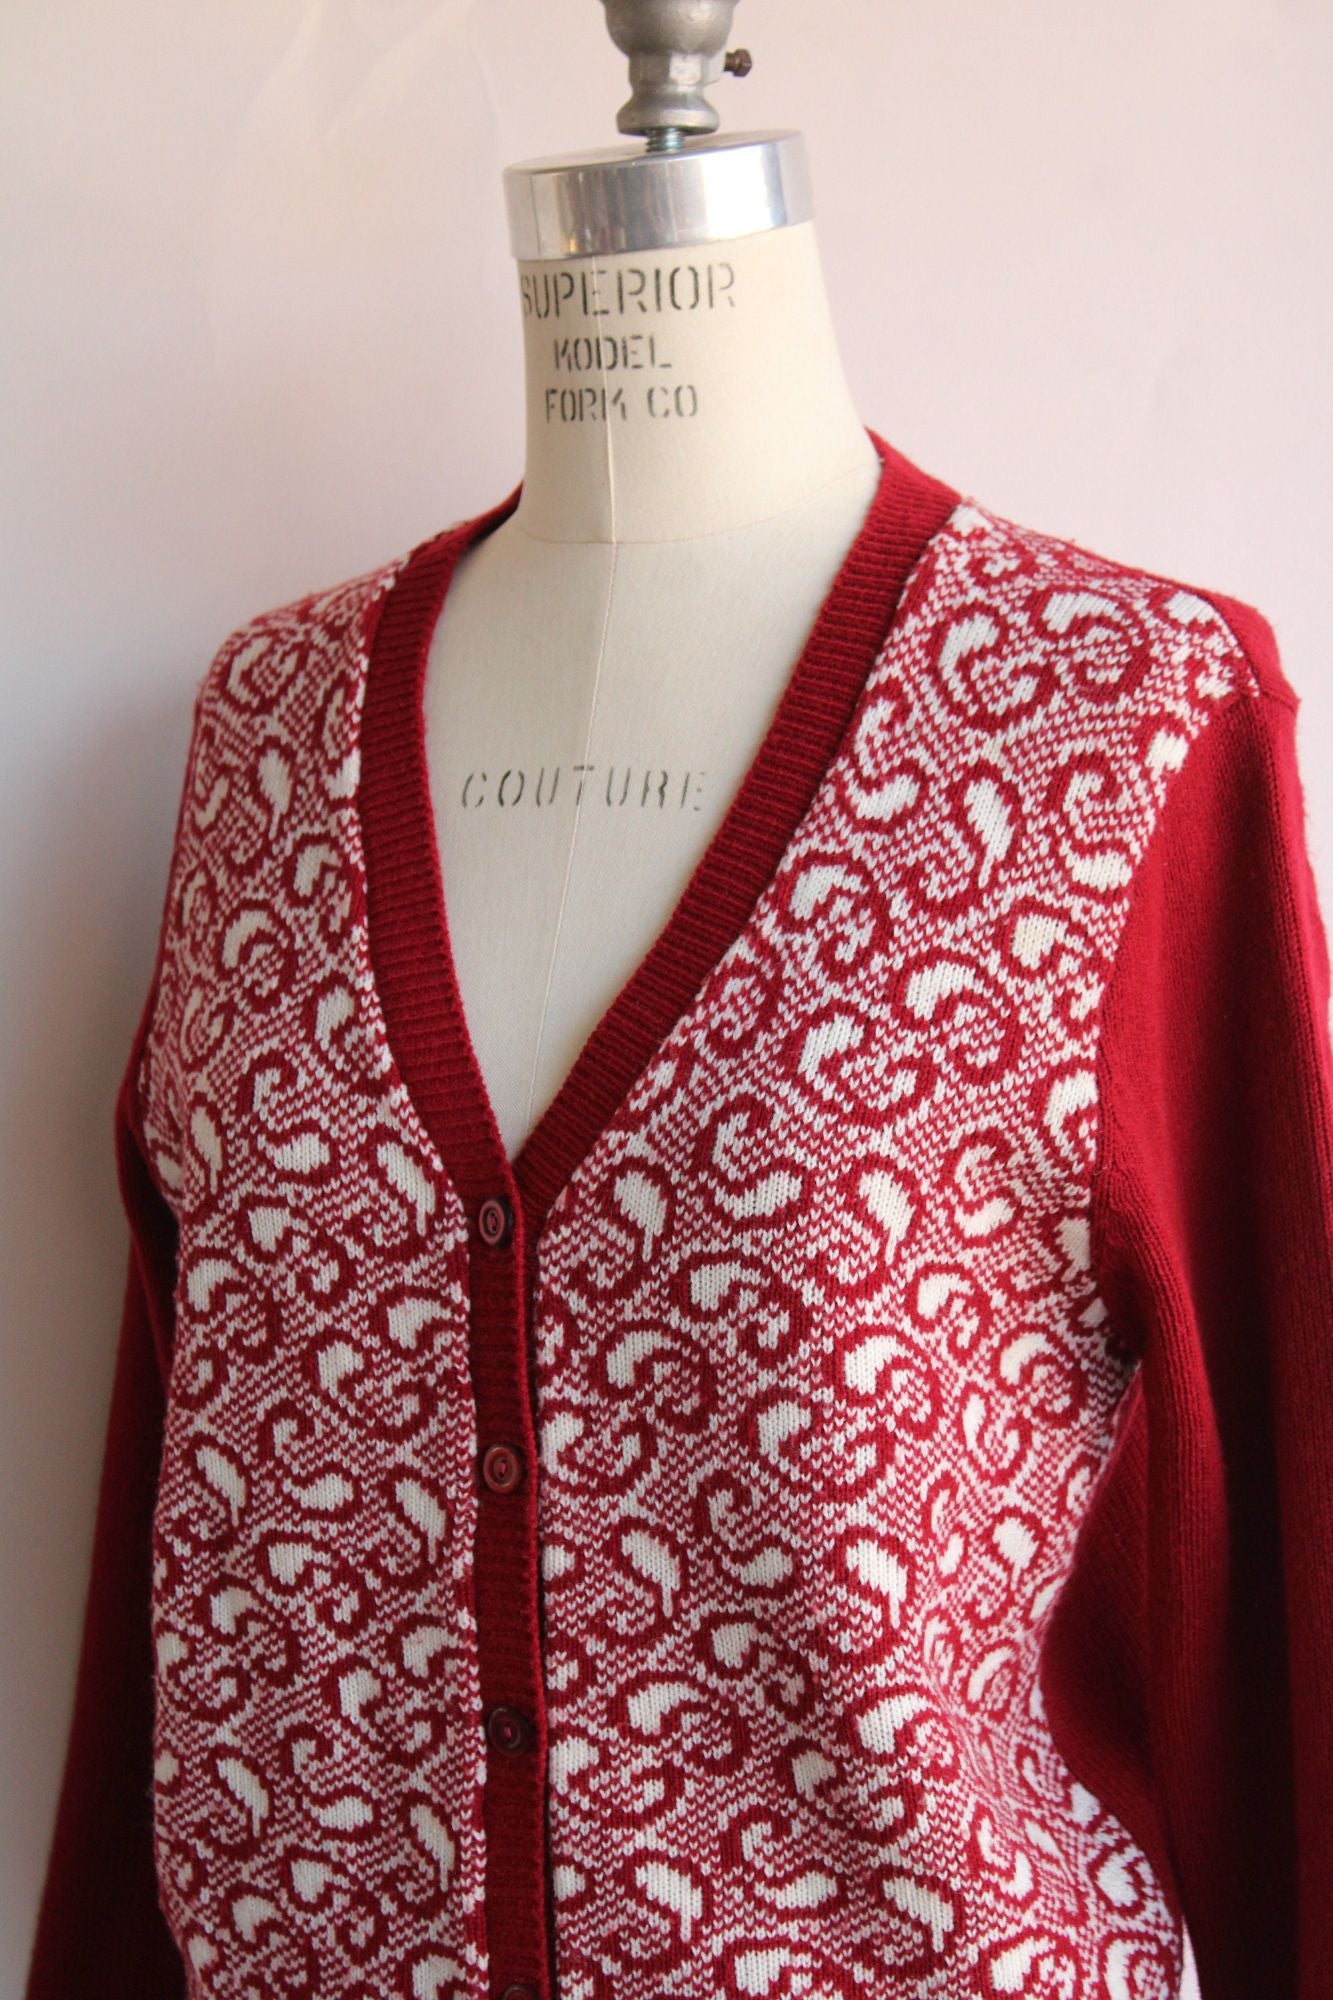 Vintage 1970s Cardigan Sweater in Red and White Paisley